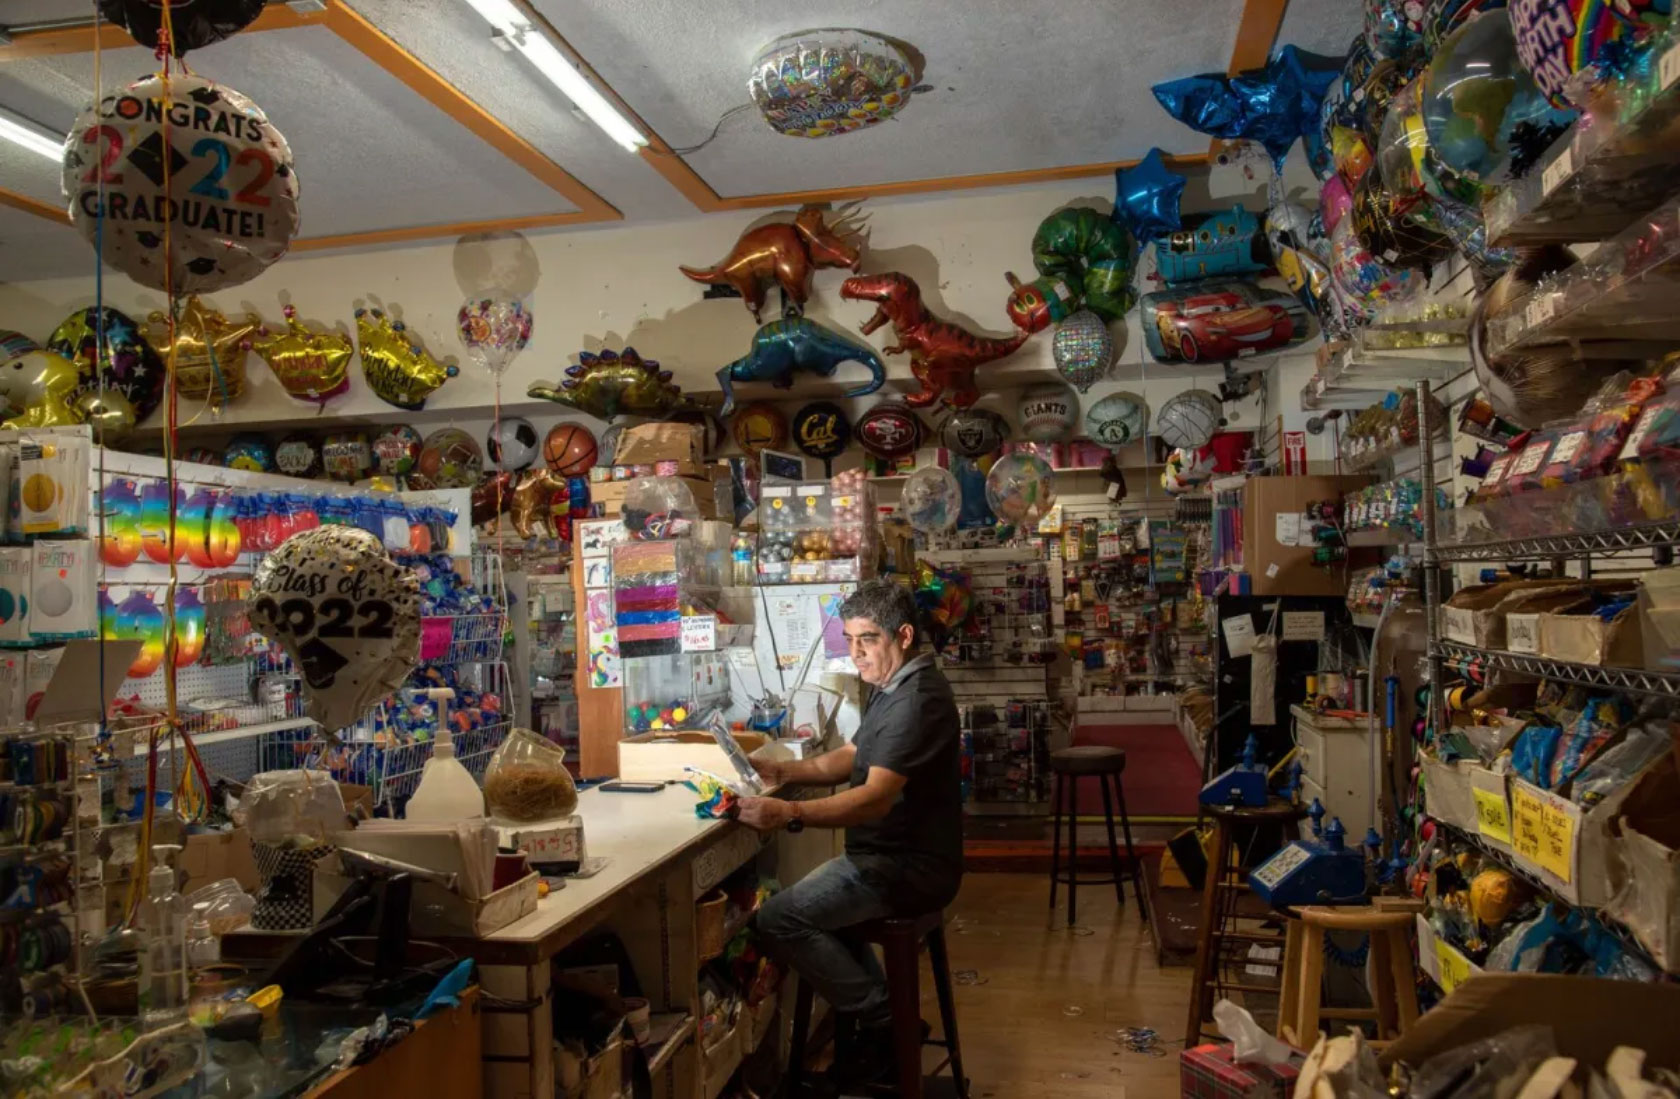 man sits at desk in store surrounded by cornucopia of inflated hearts, animals